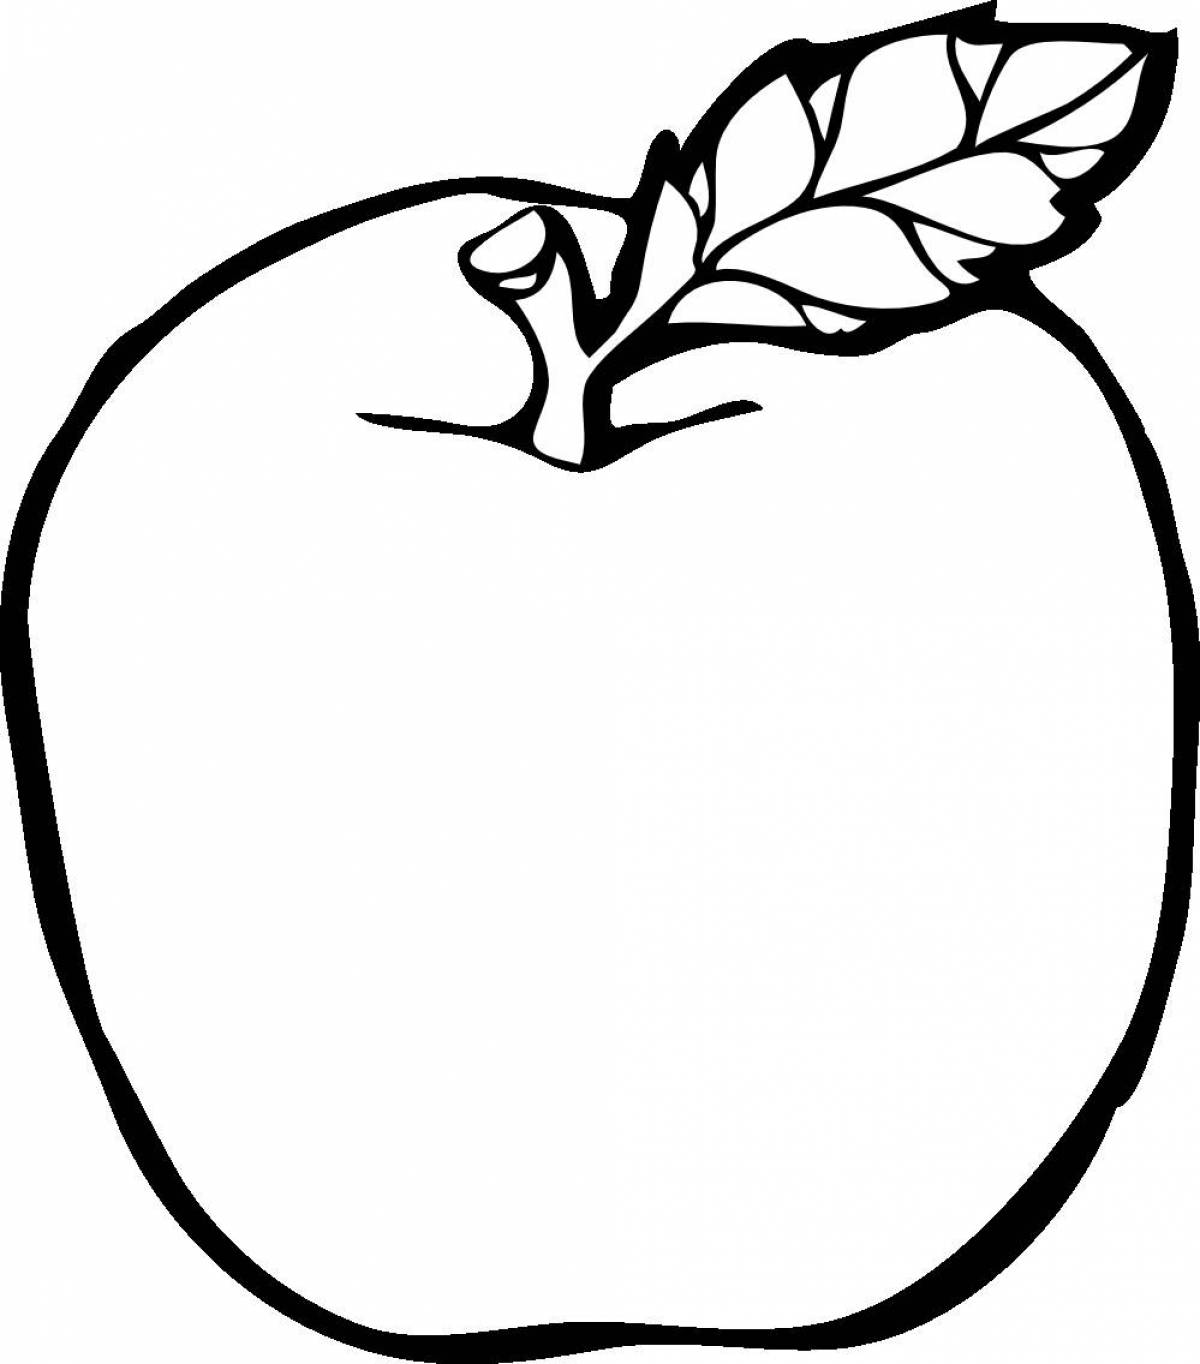 Delightful apple coloring book for kids